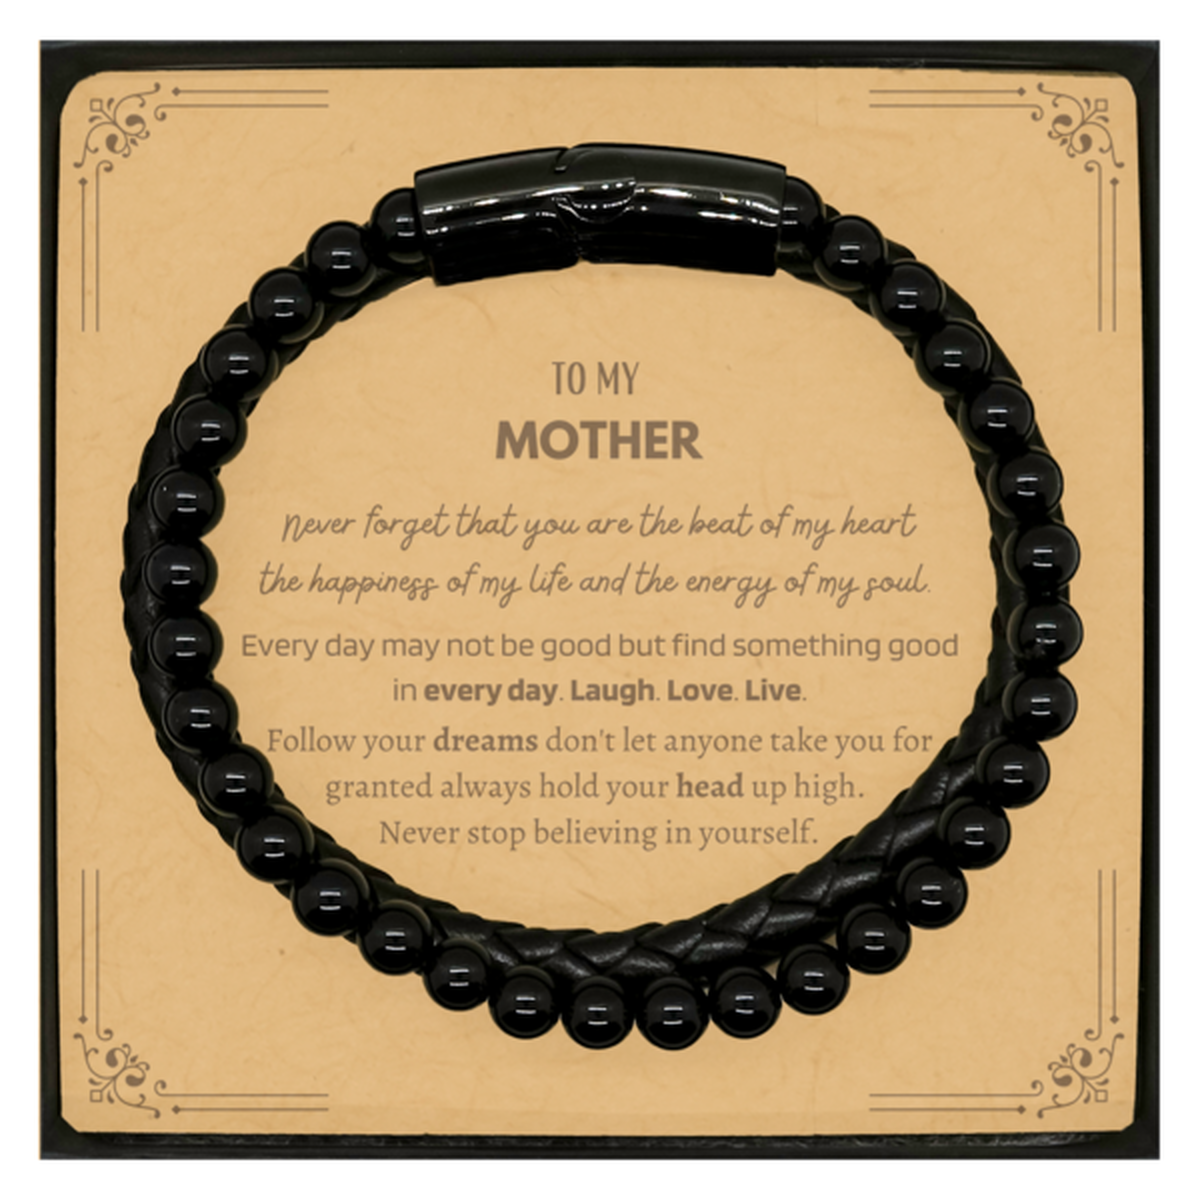 To My Mother Message Card Gifts, Christmas Mother Stone Leather Bracelets Present, Birthday Unique Motivational For Mother, To My Mother Never forget that you are the beat of my heart the happiness of my life and the energy of my soul